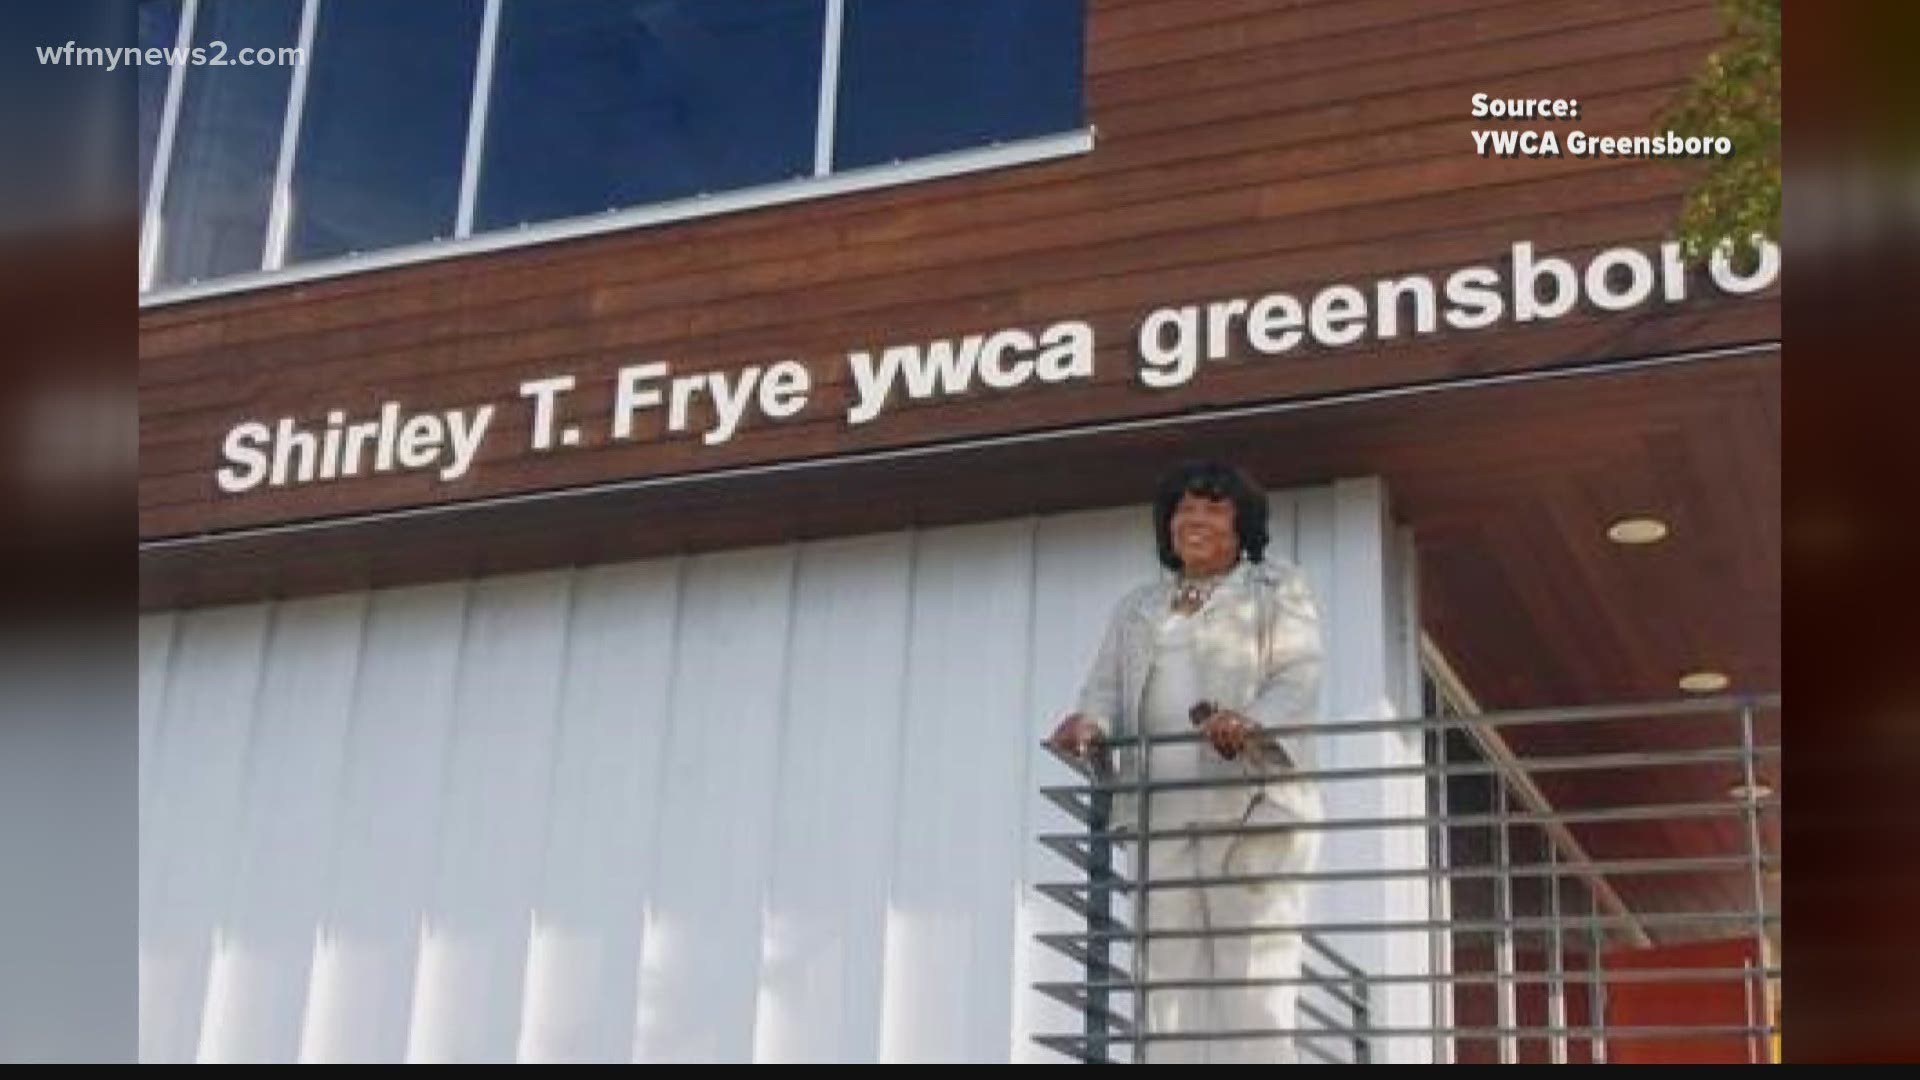 To honor Shirley Frye’s advocacy for the YWCA, the organization is hosting Frye-WCA fest.